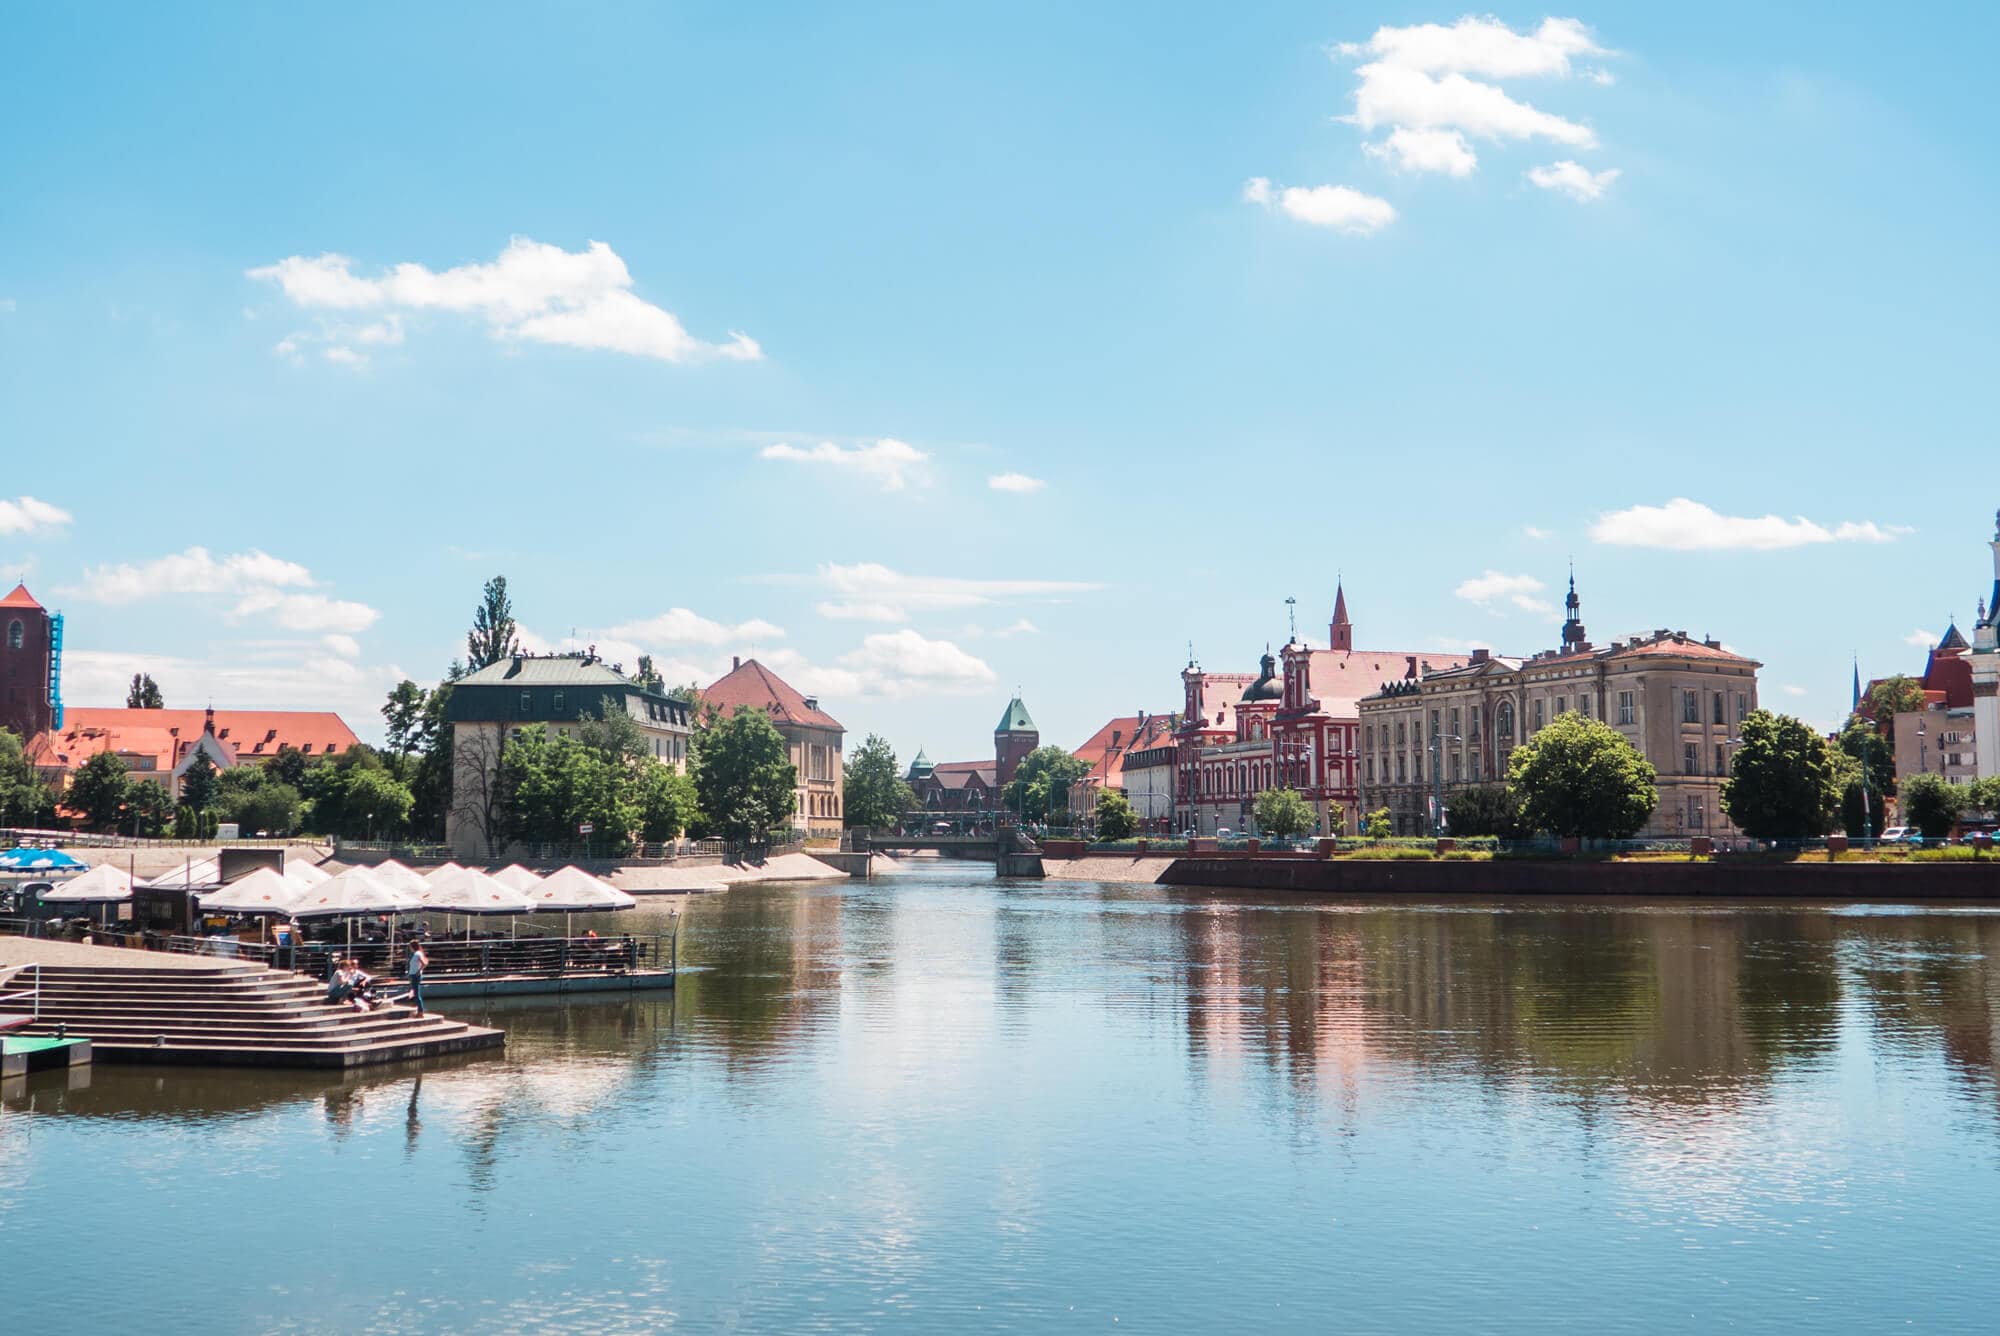 Wroclaw, Poland - One of the most underrated cities in the world + why you should add it to your bucket list low!